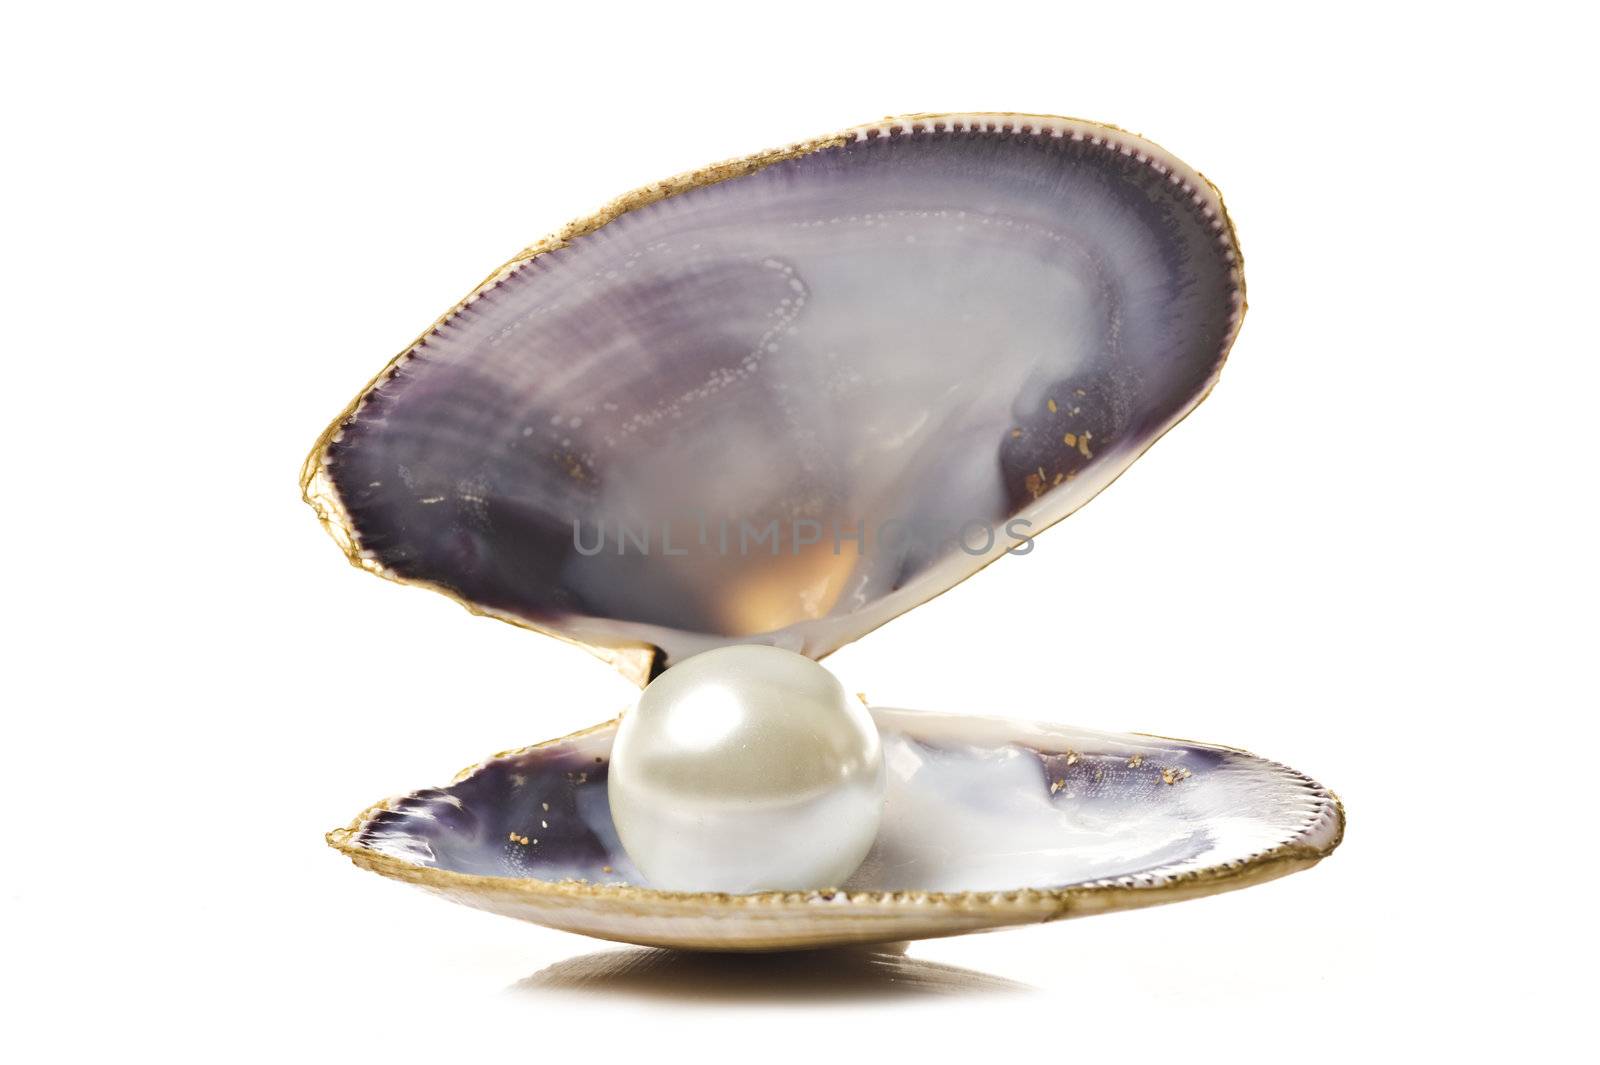 One white pearl in a sea shell by tish1